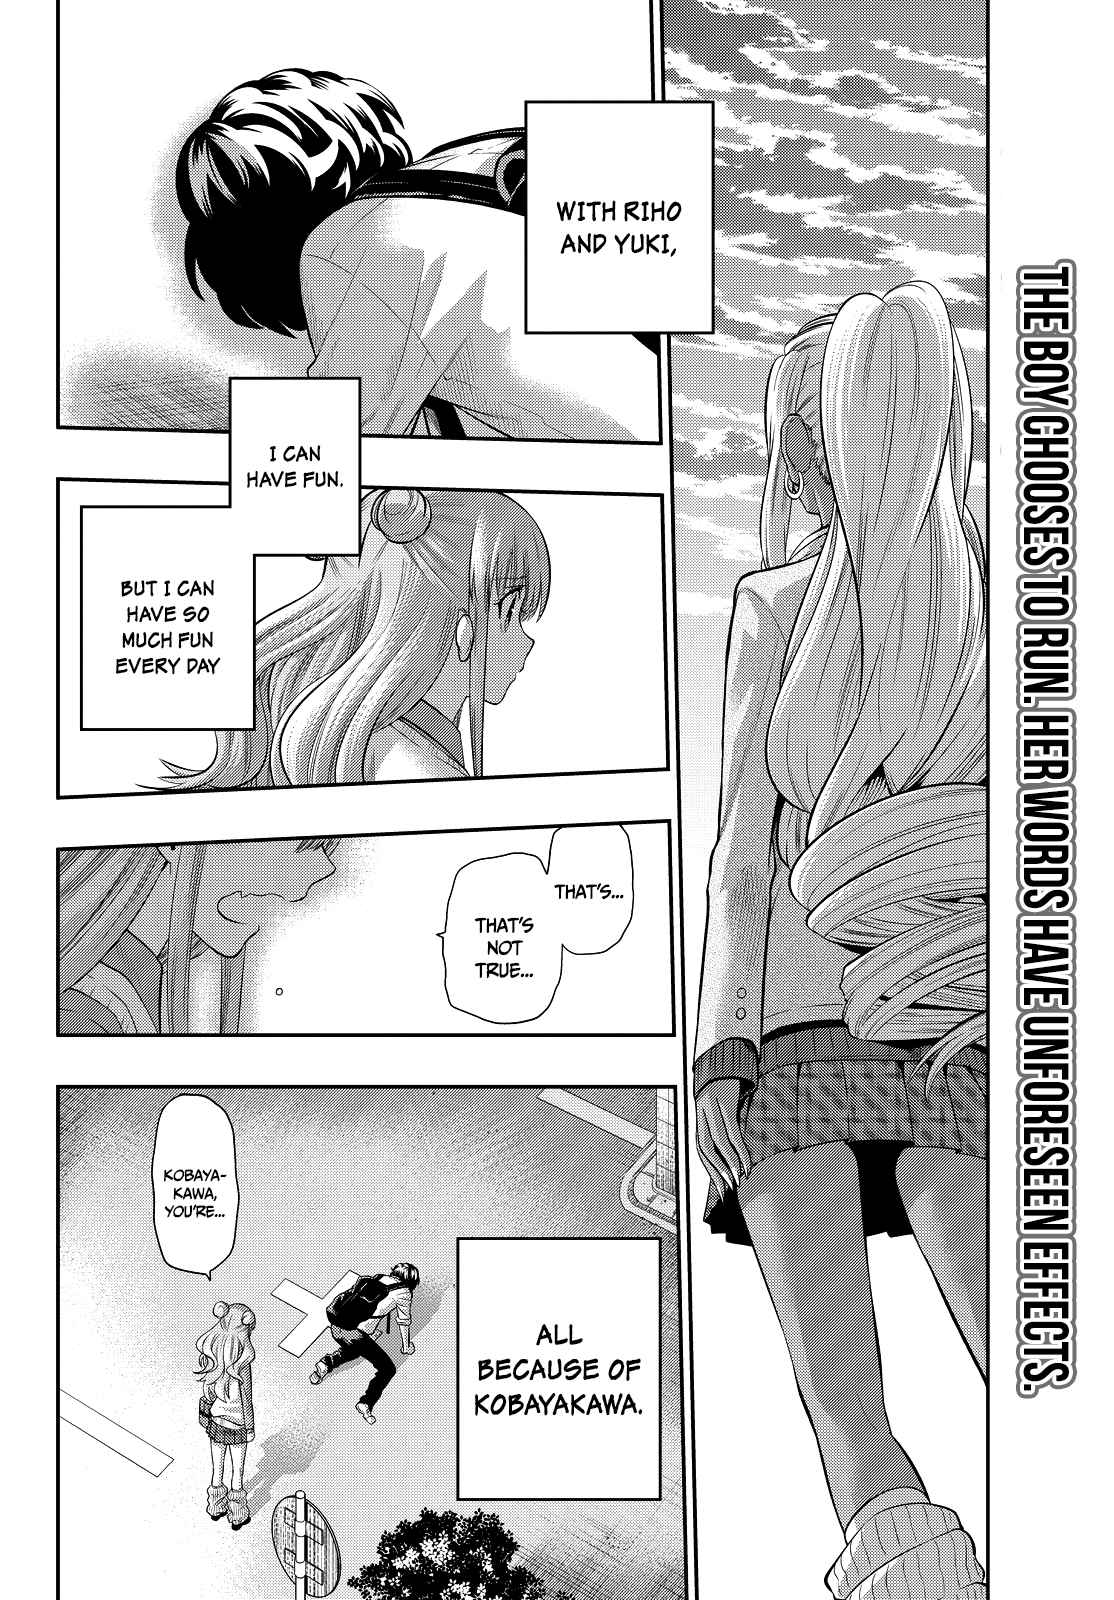 Hoshino, Me O Tsubutte Vol. 6 Ch. 47 Repentances Without Value